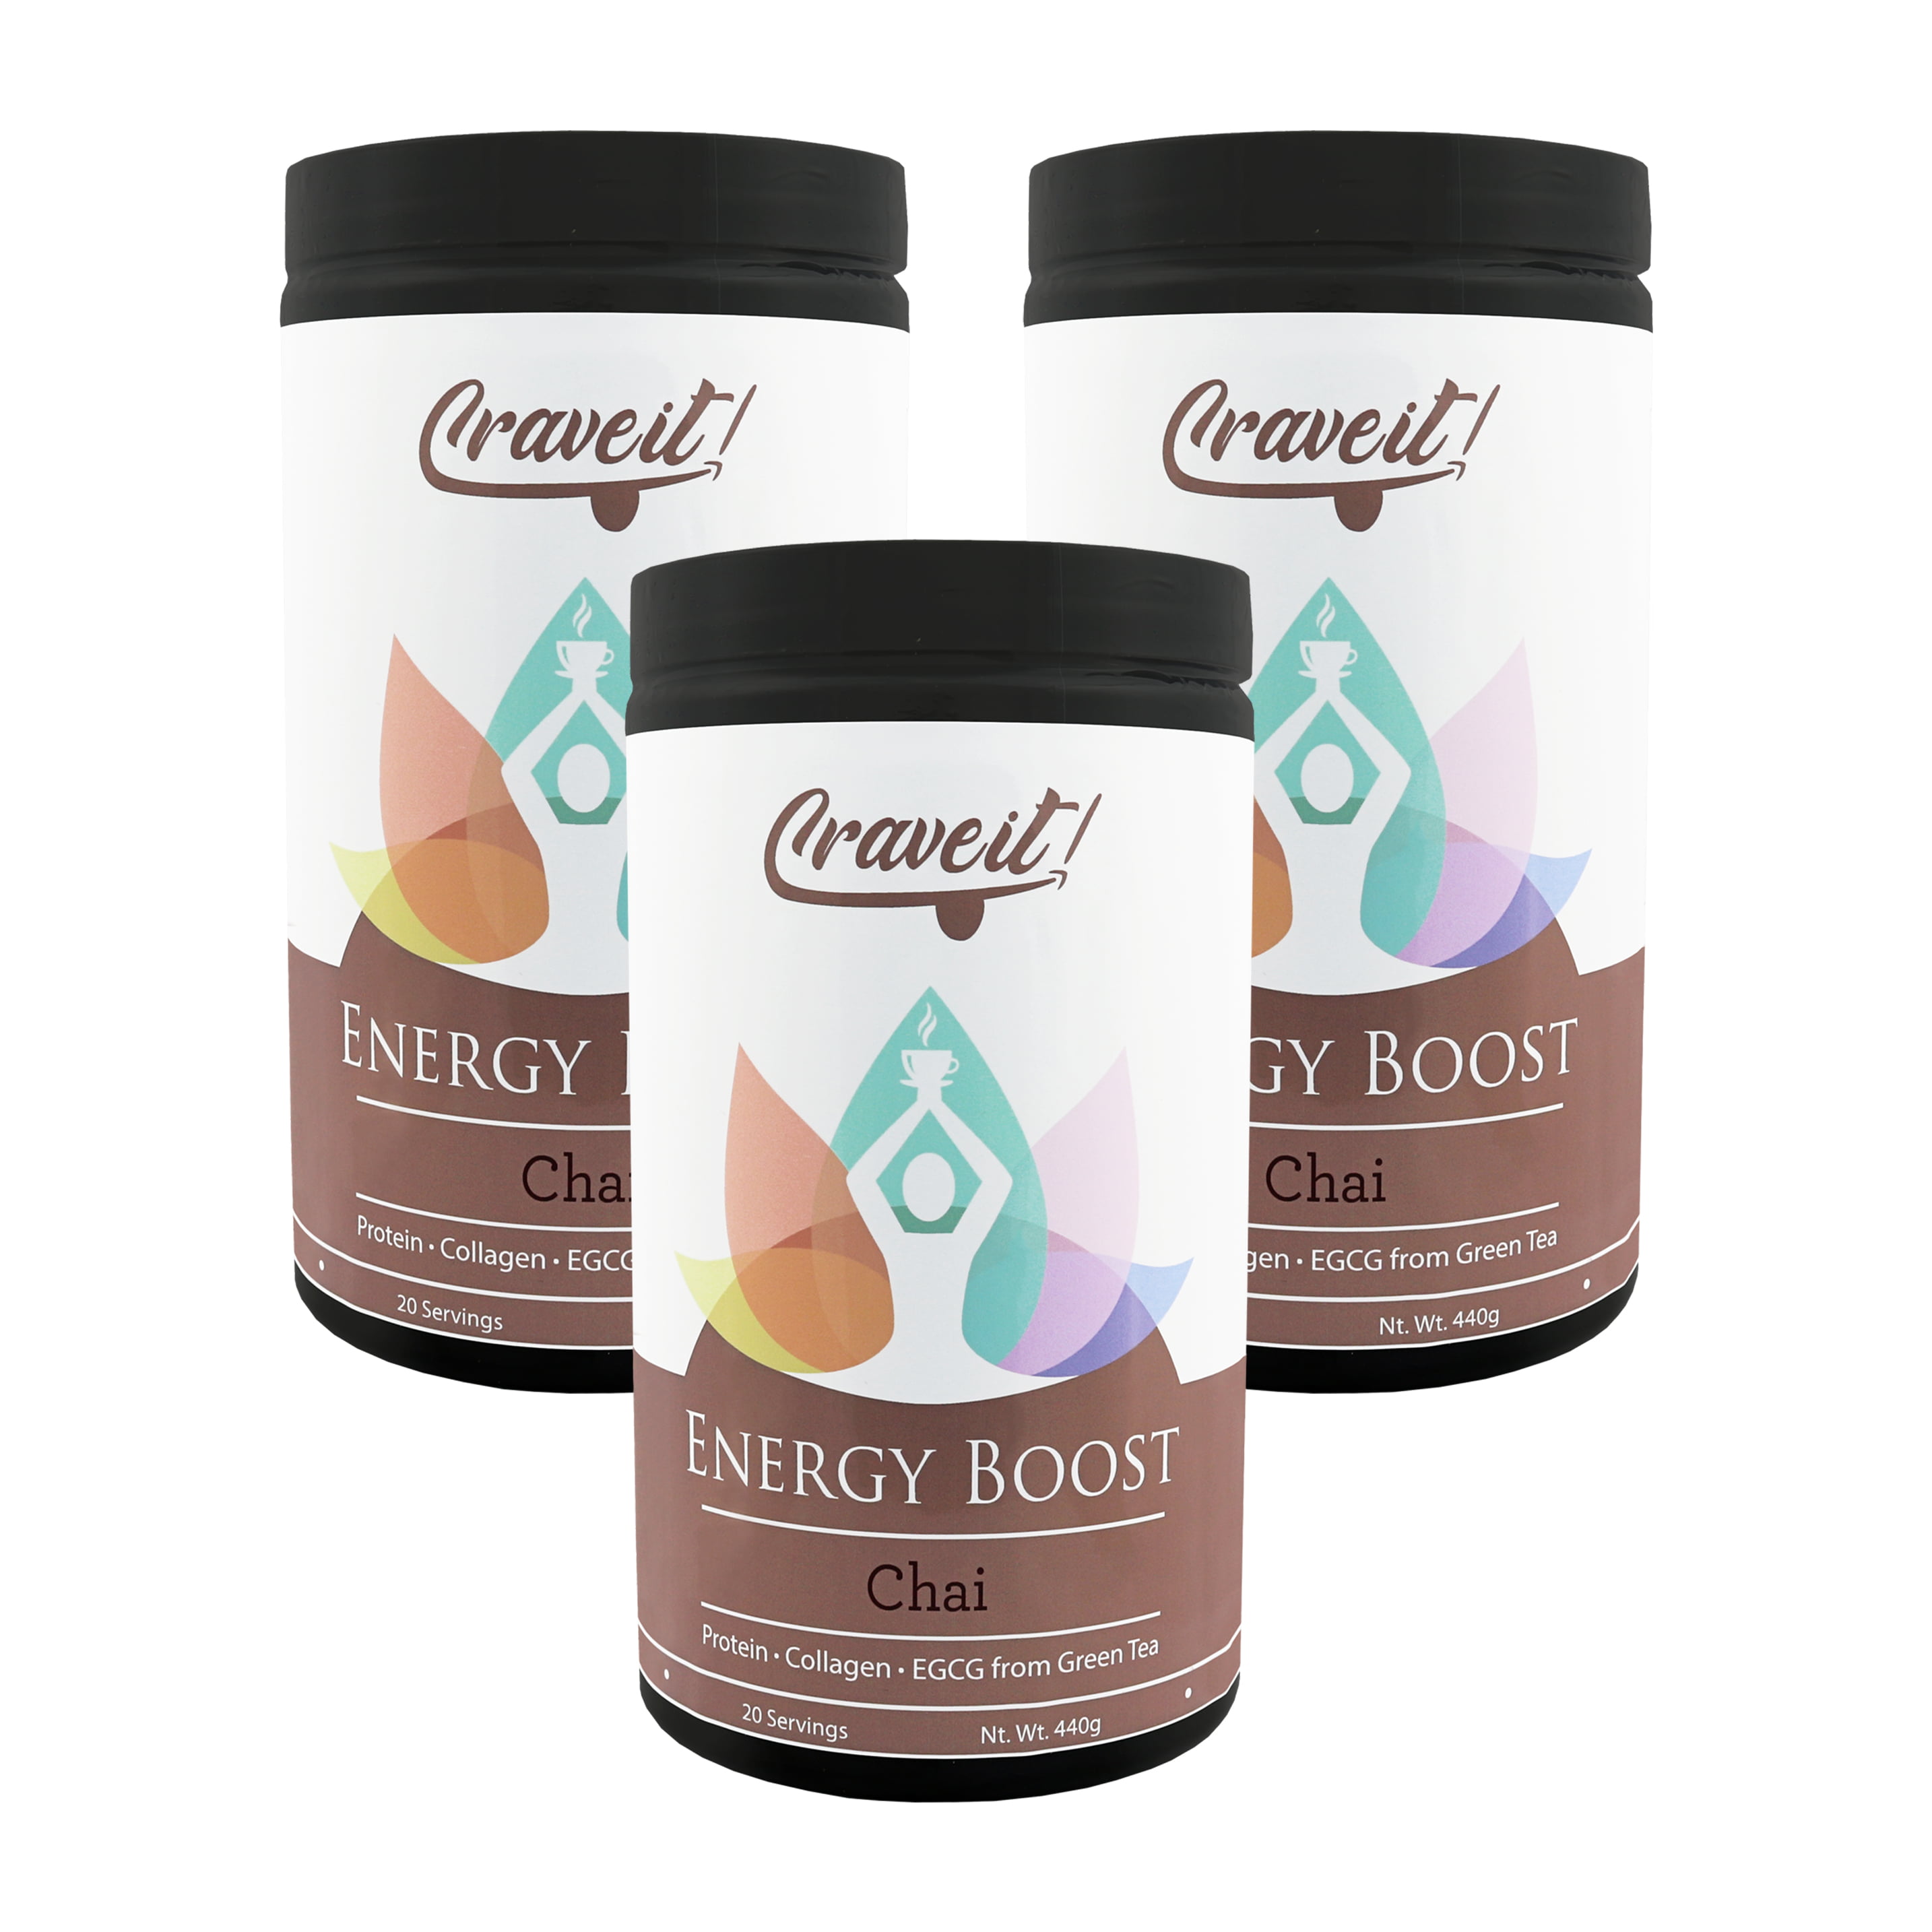 Crave It Energy Boost Drink Mix! Packed with EGCG from Green Tea ...